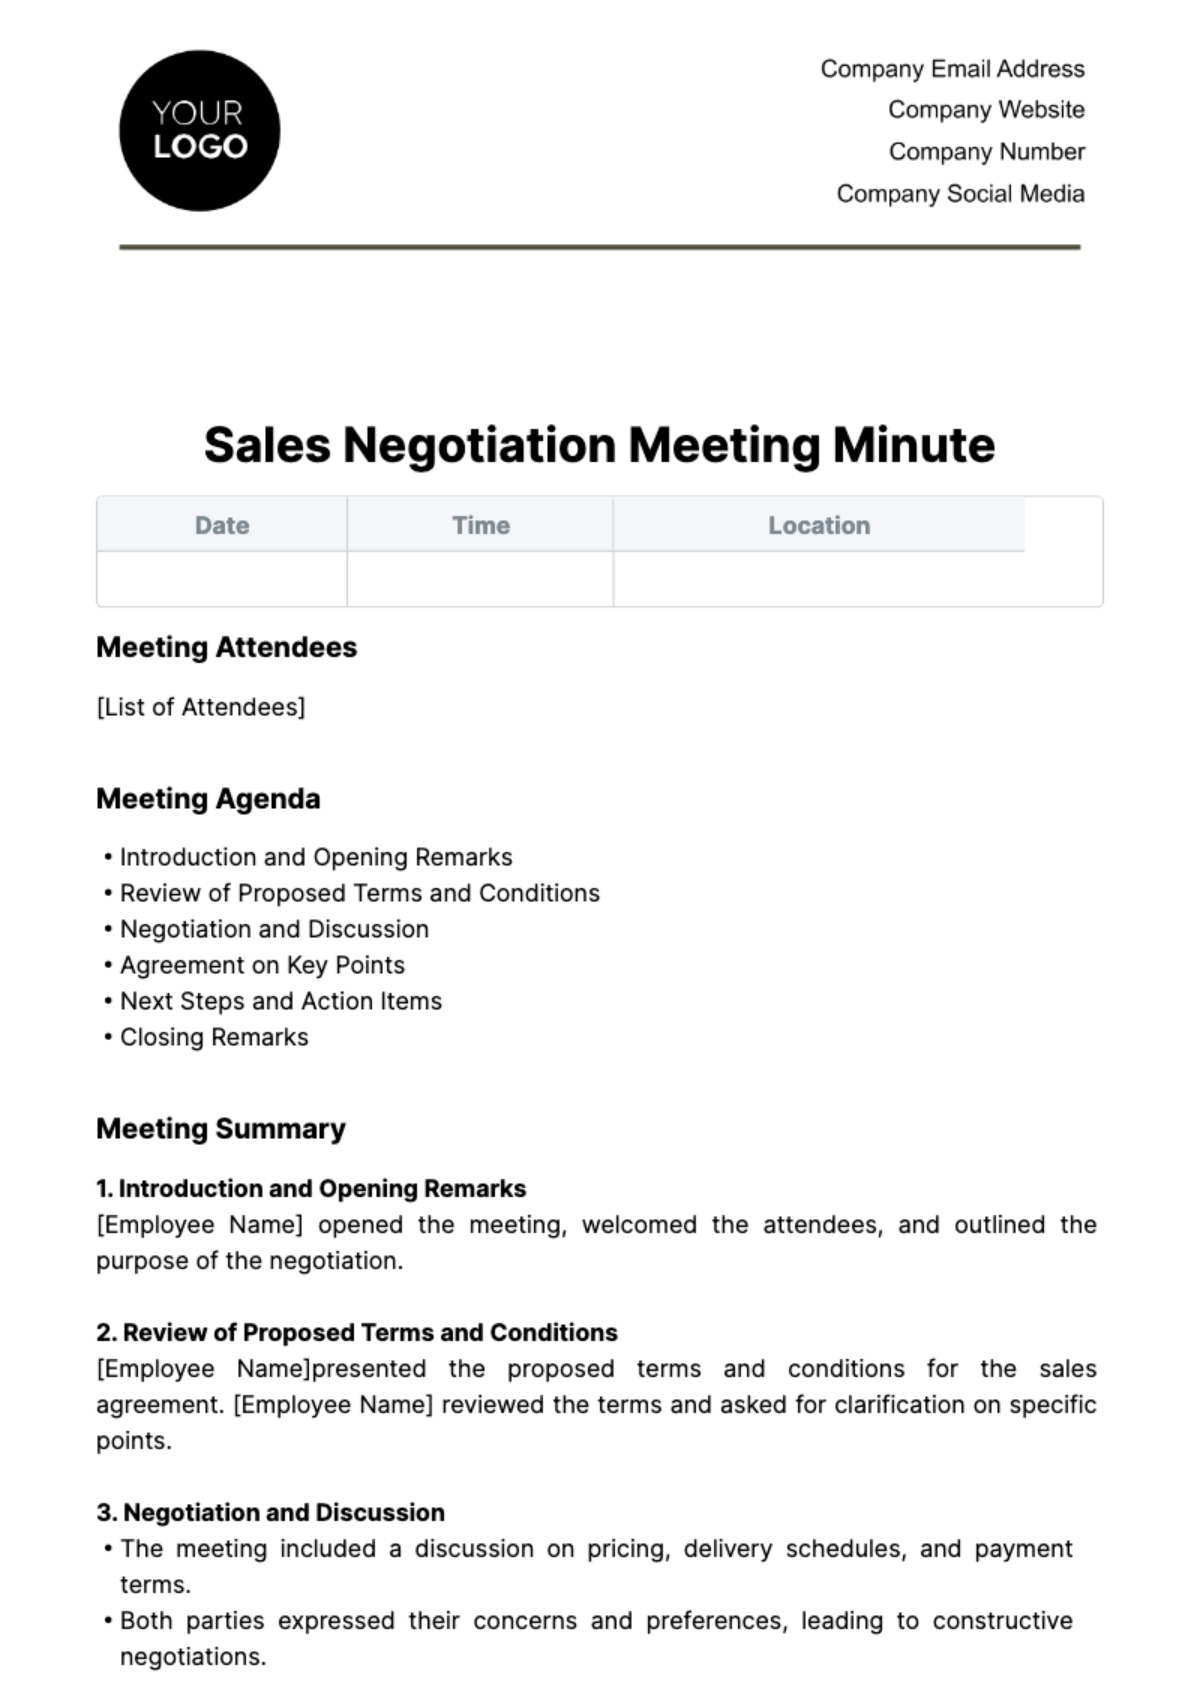 Free Sales Negotiation Meeting Minute Template